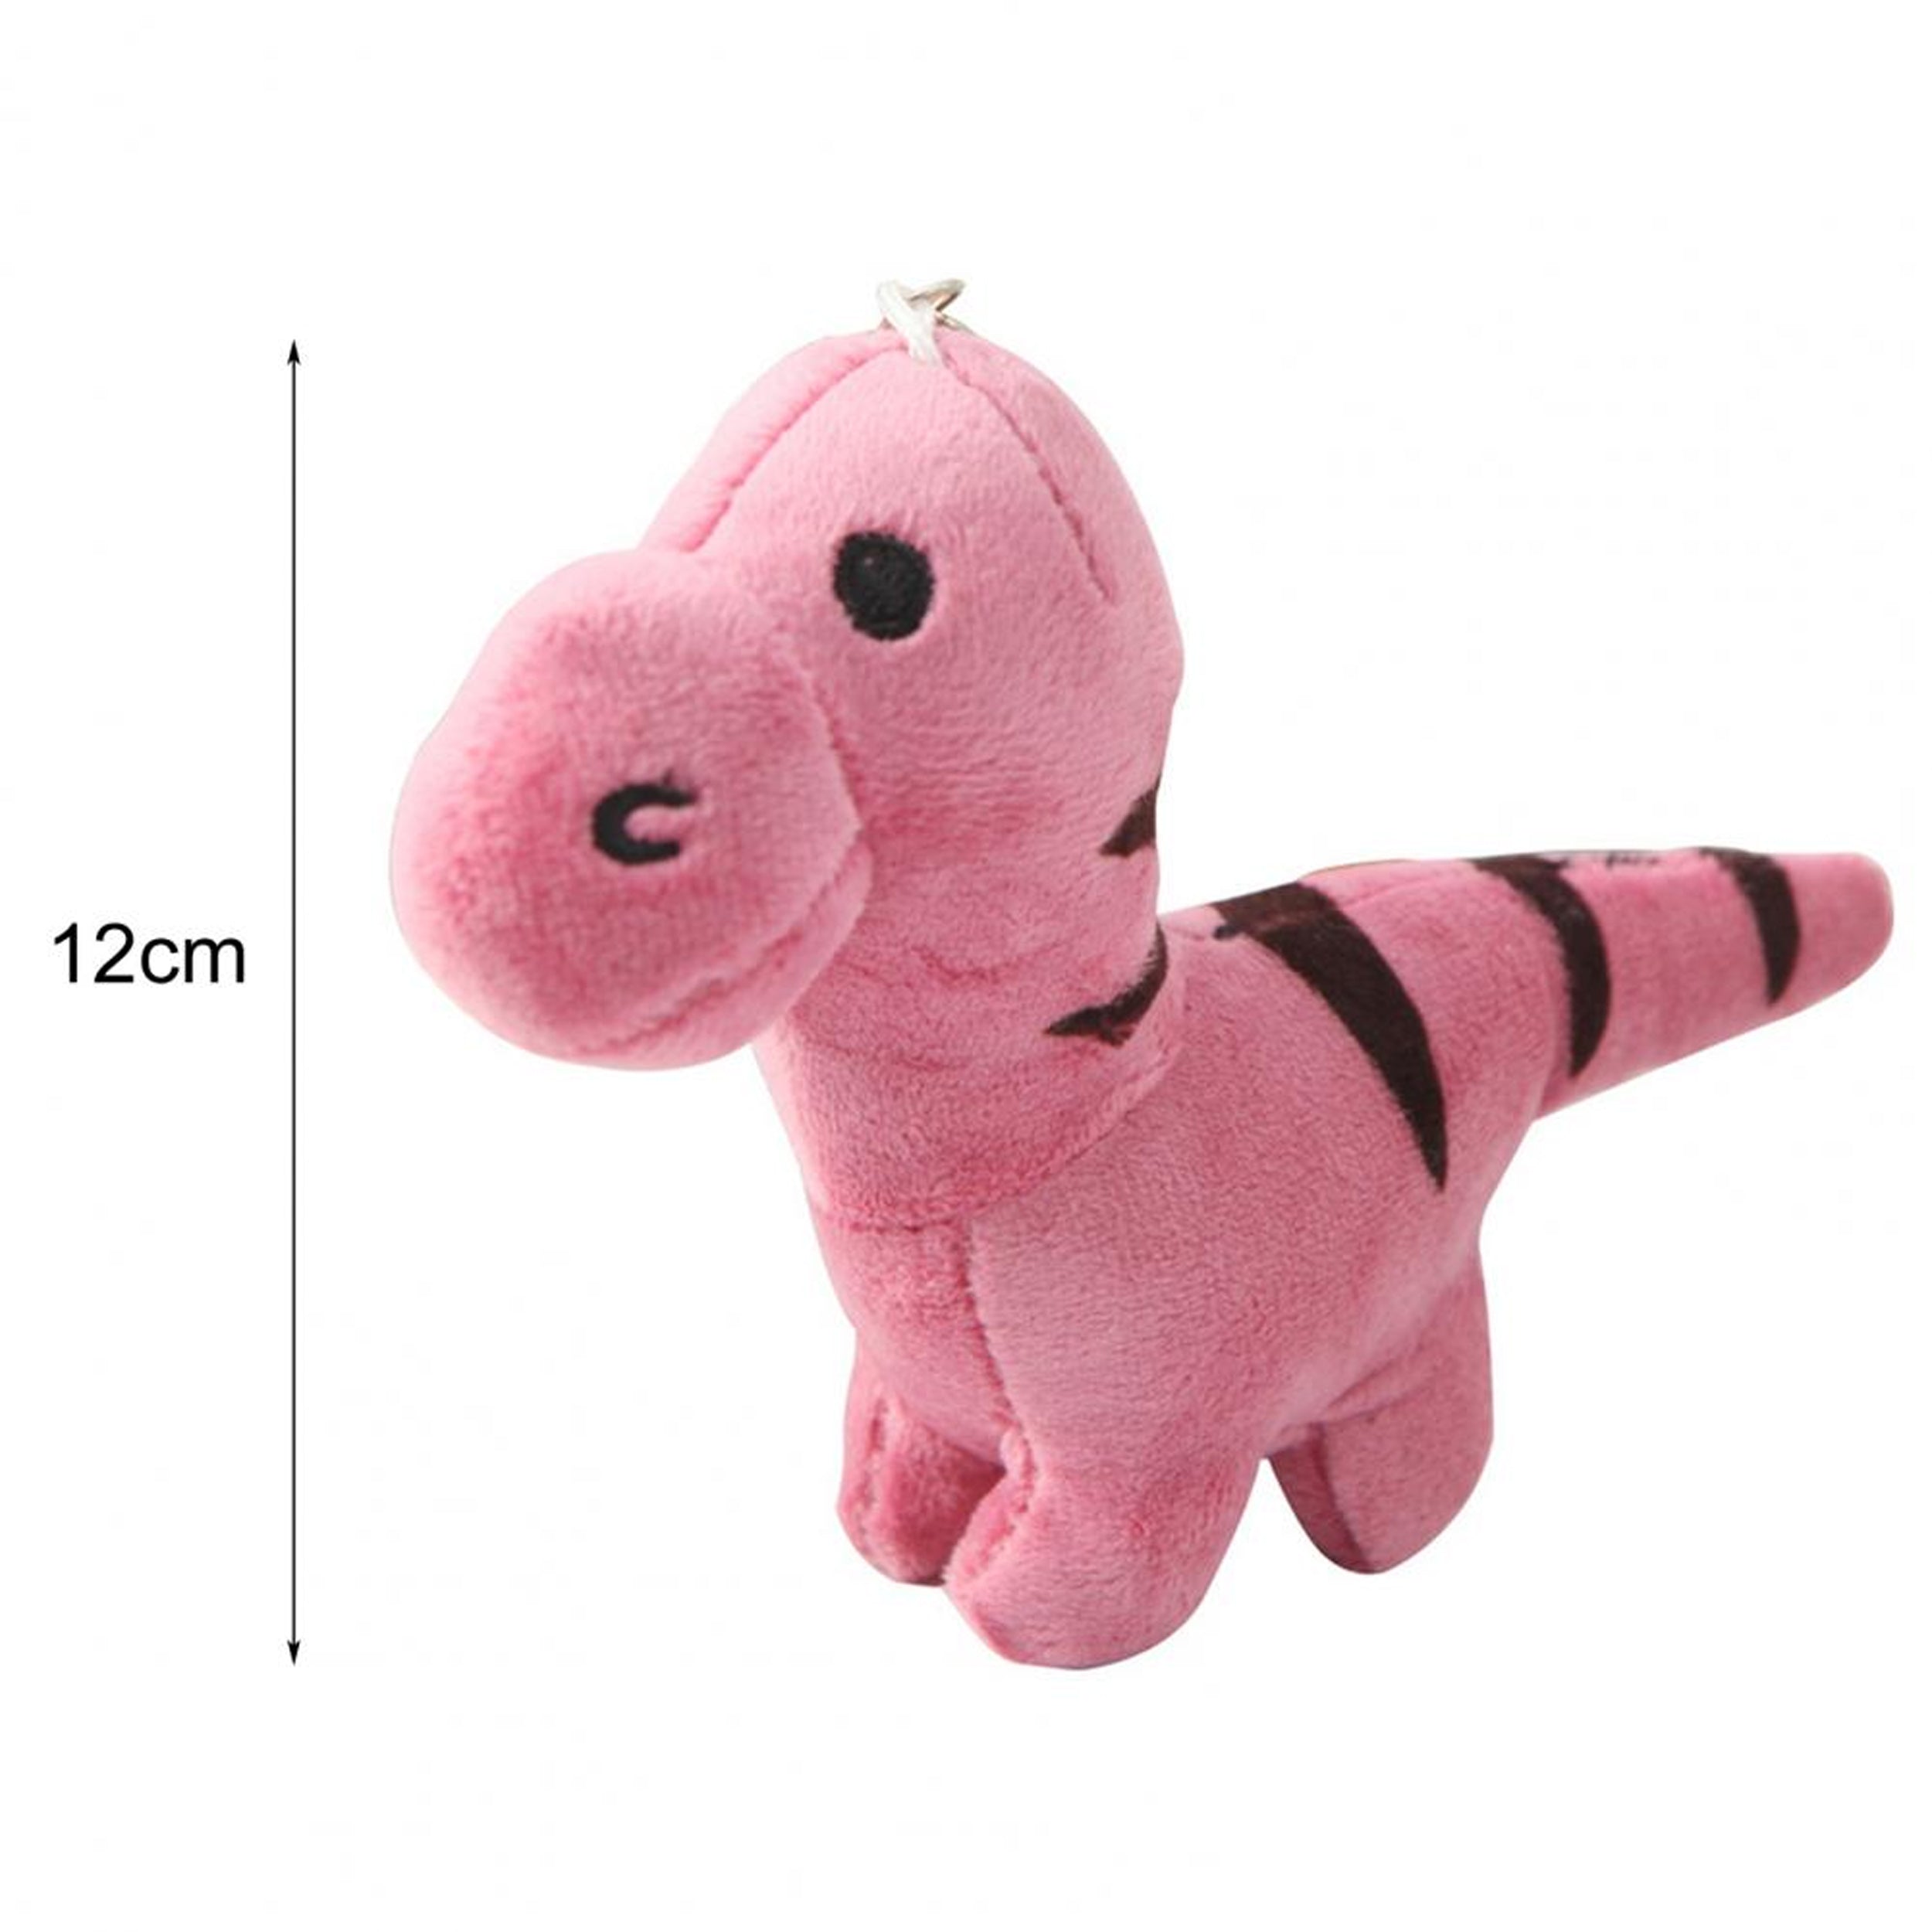 Add Some Adventure to Your Kid's Keys with Our Mini Dinosaur Soft Plush Keychain